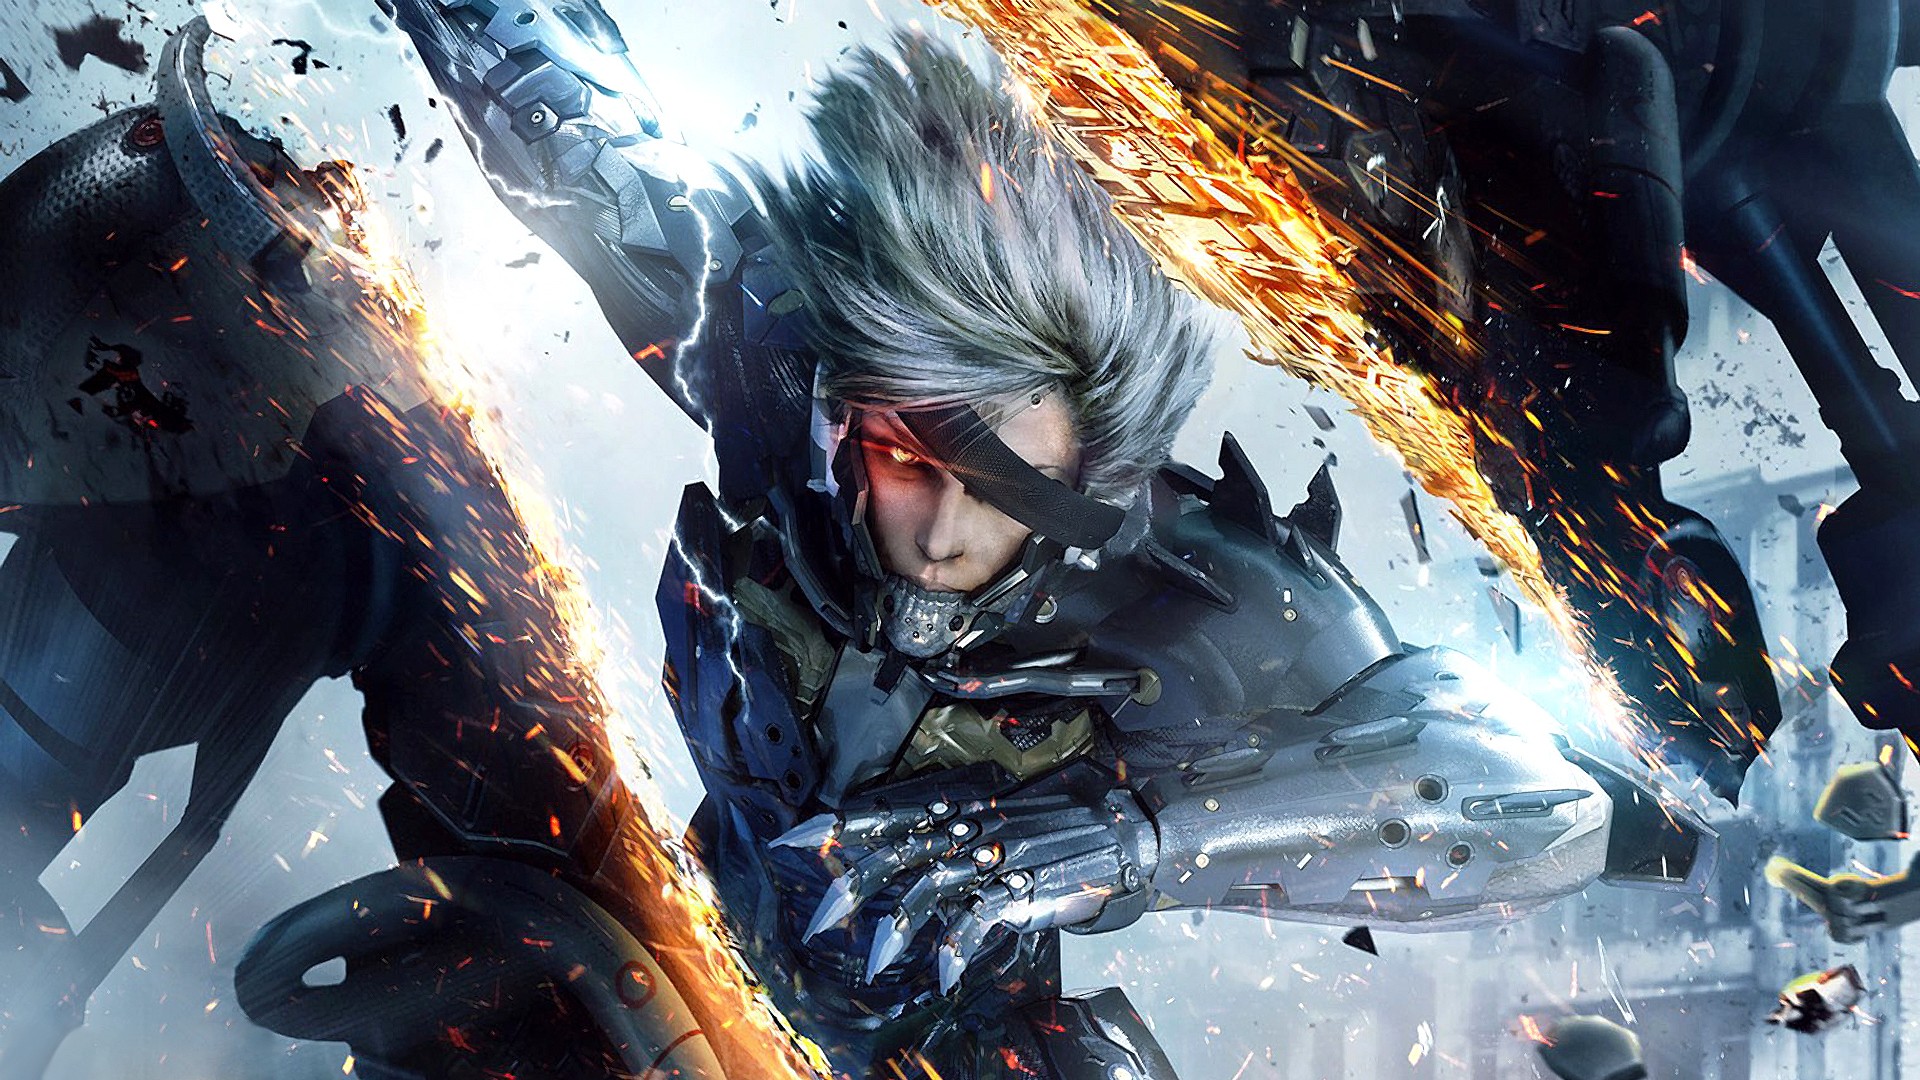 Note All Metal Gear Rising HD wallpapers are presented in 19201080